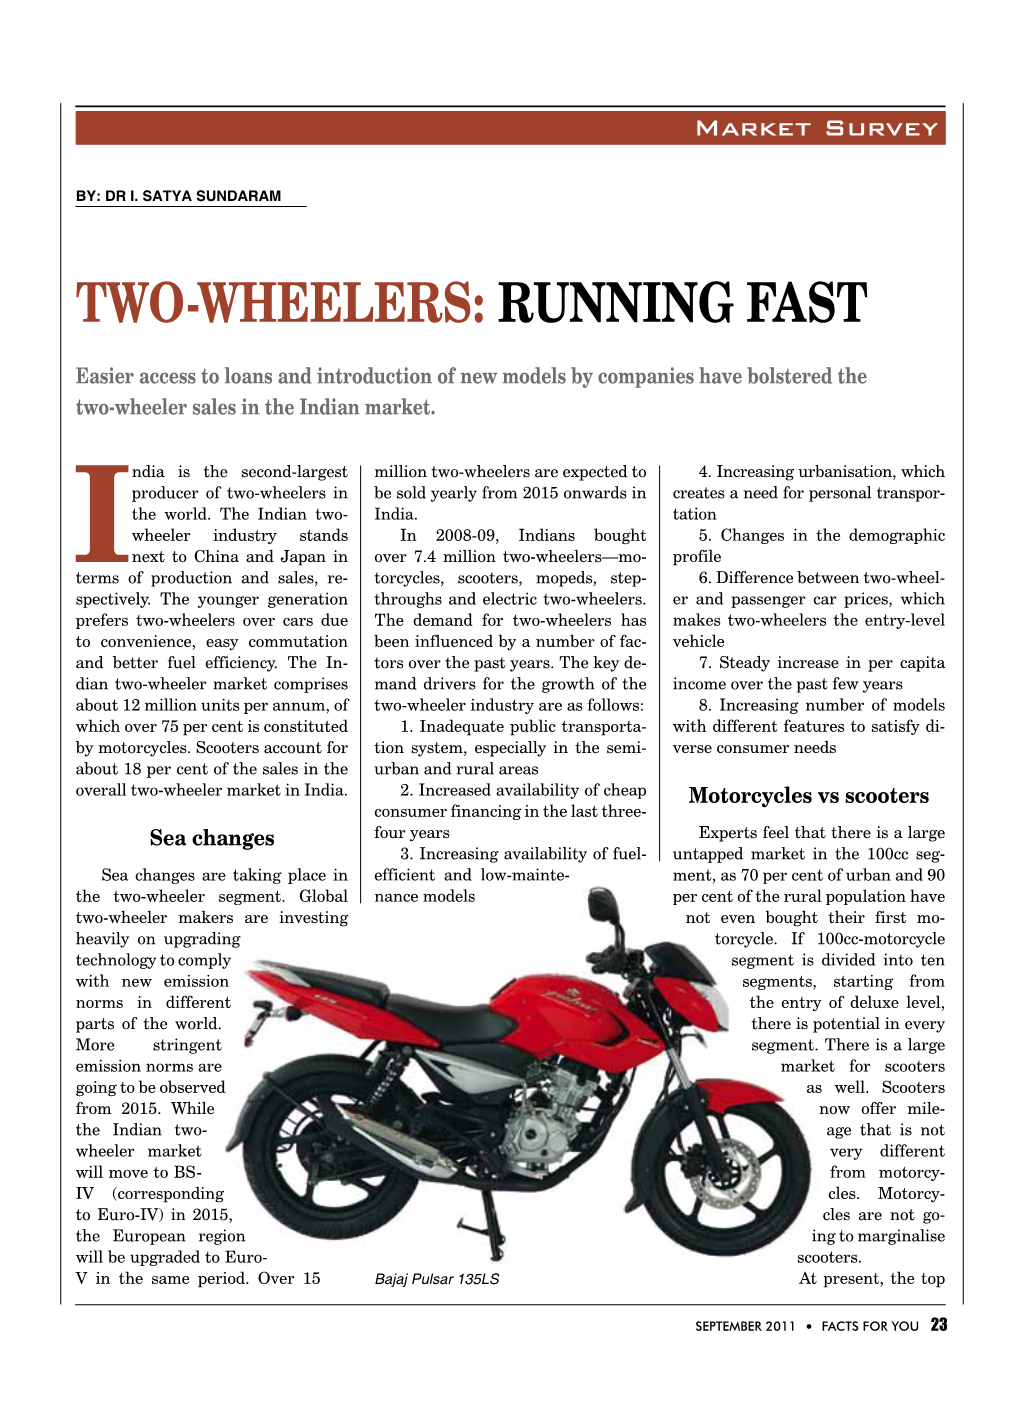 Two-Wheelers: Running Fast